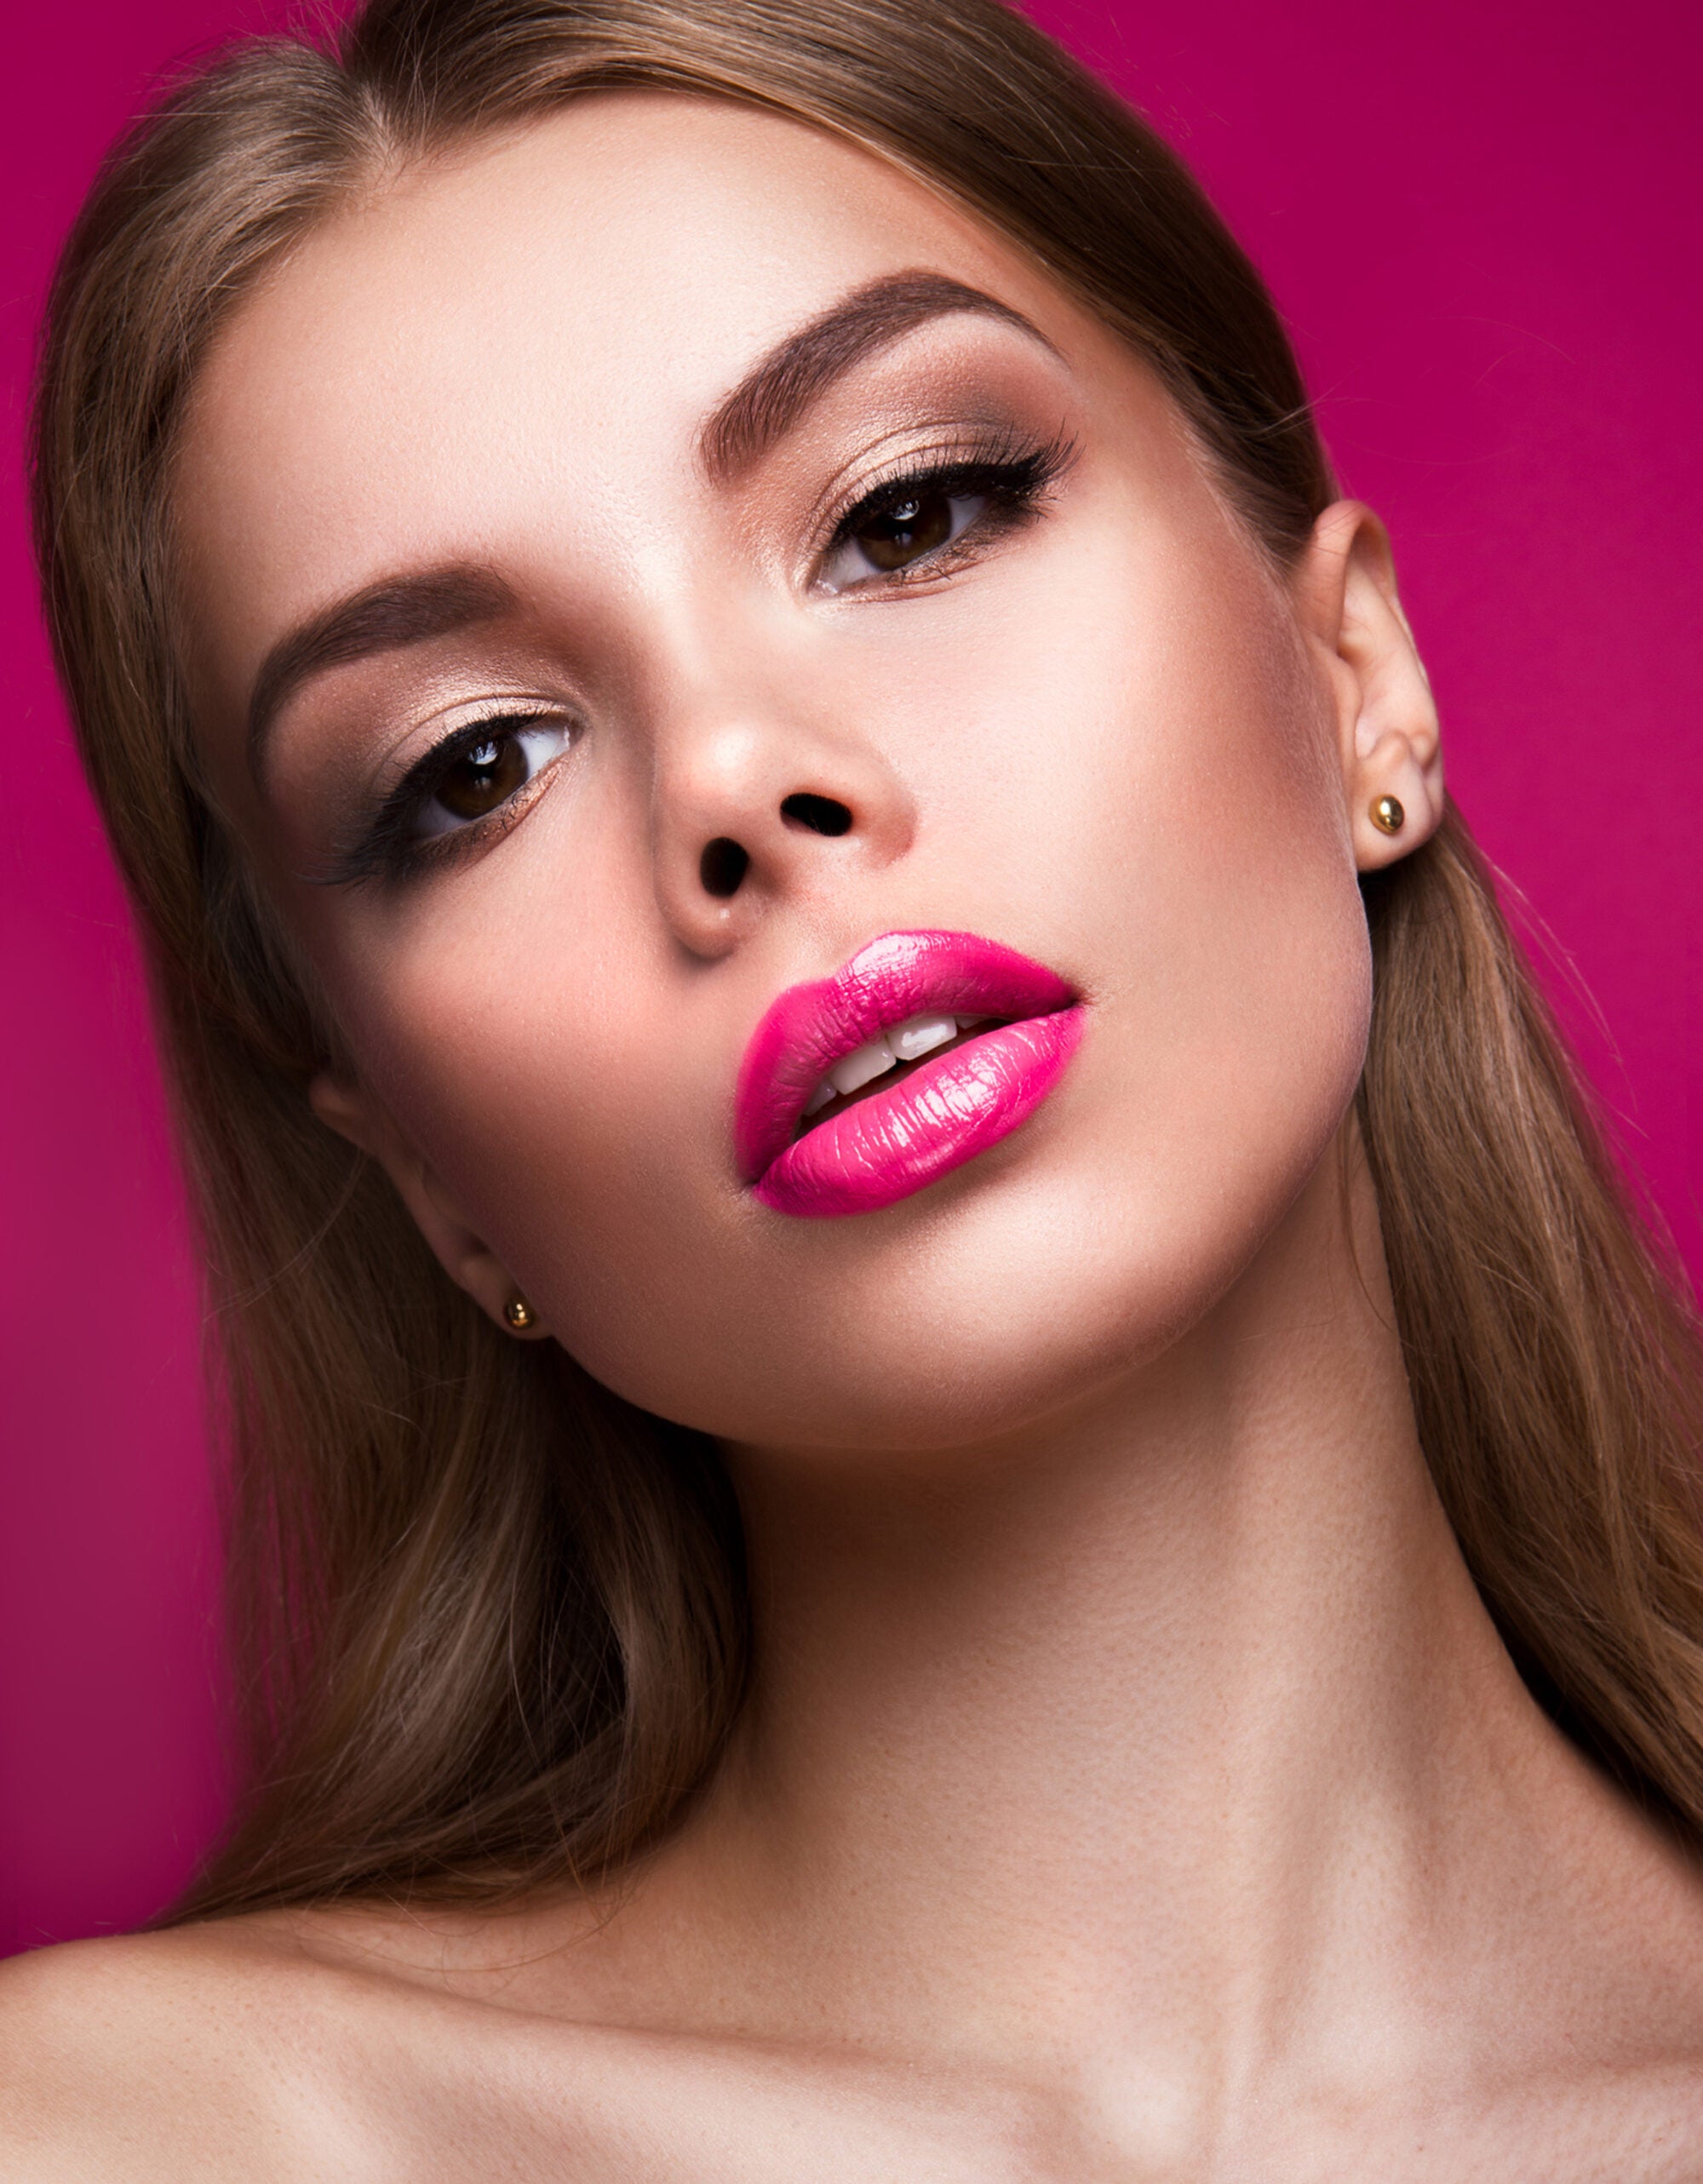 woman with bright pink lipstick